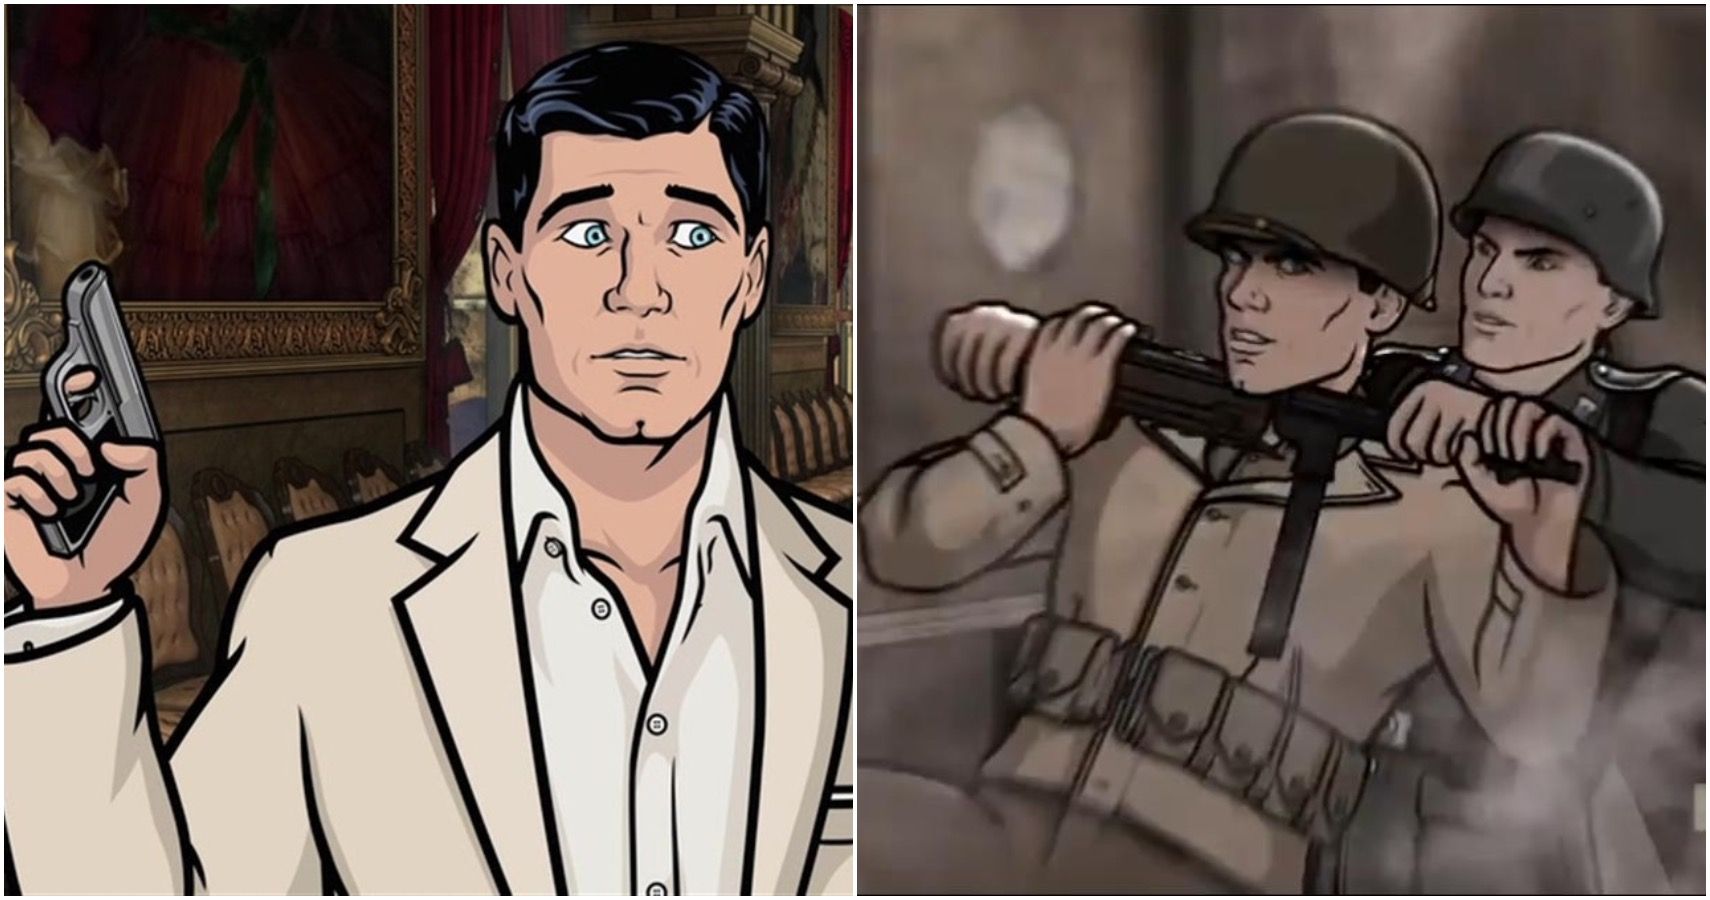 Archer holding his pistol and another version fighting a Nazi